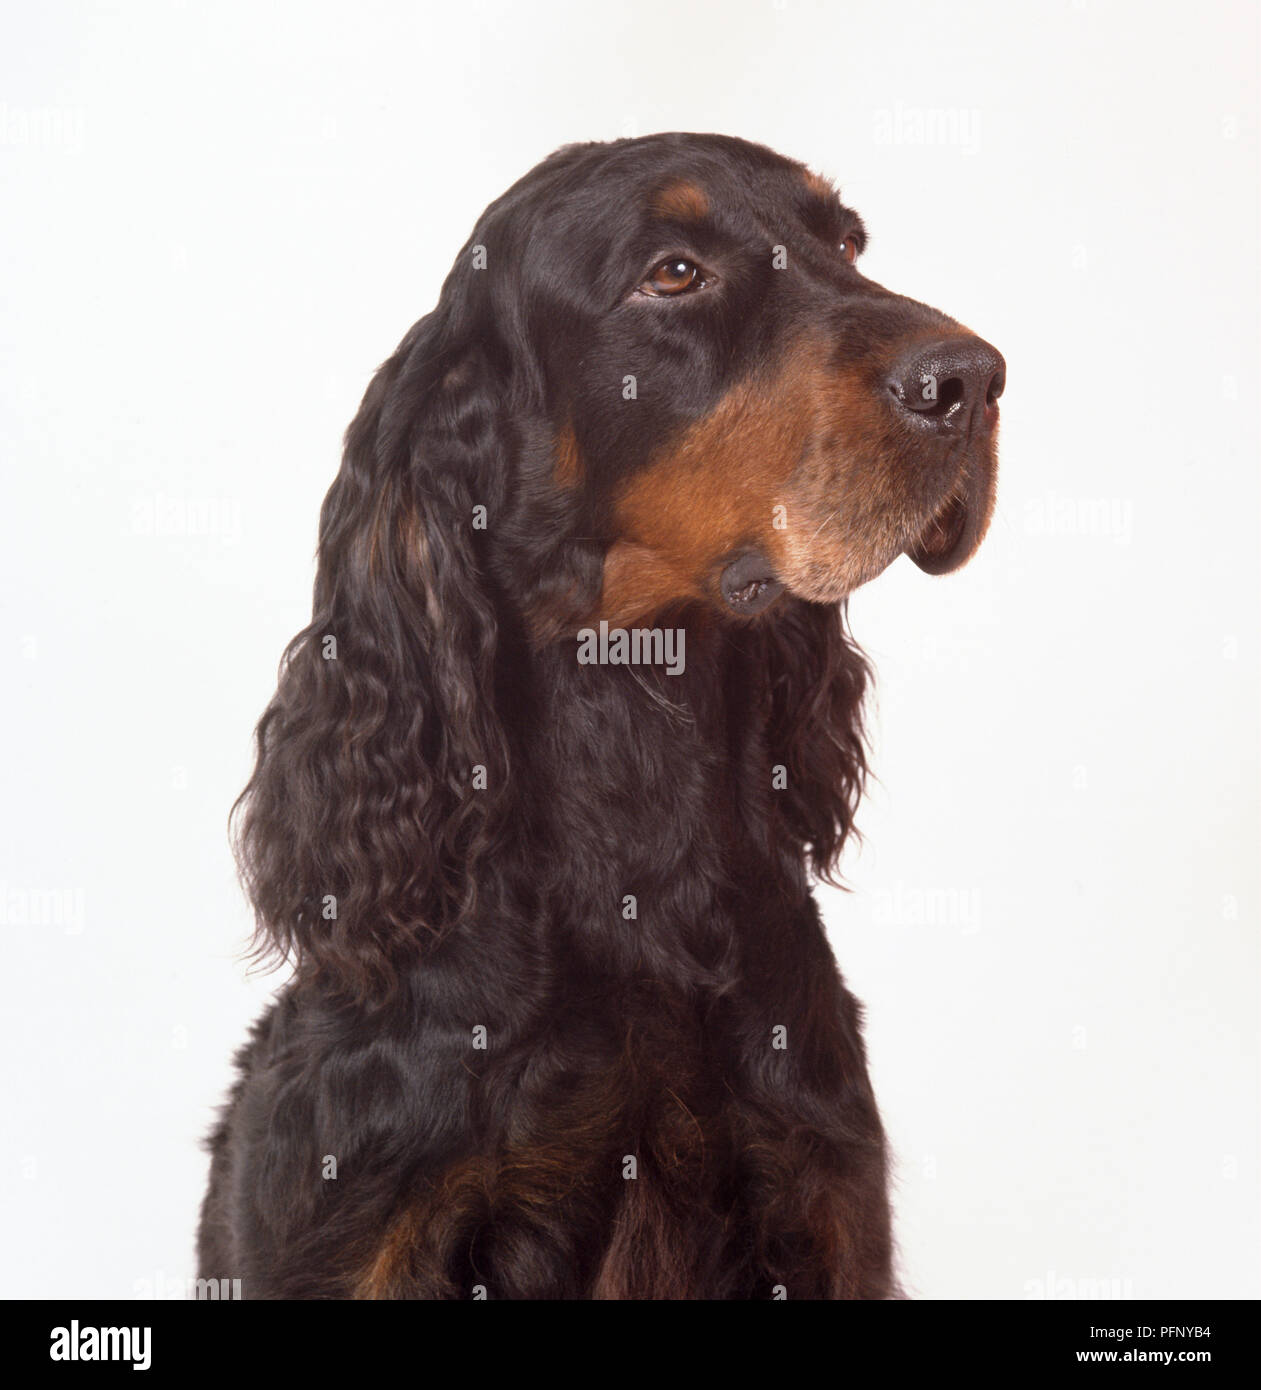 A Handsome Gordon Setter With A Black Coat A Tan Muzzle And Wavy Haired Ears Head And Neck Only Stock Photo Alamy